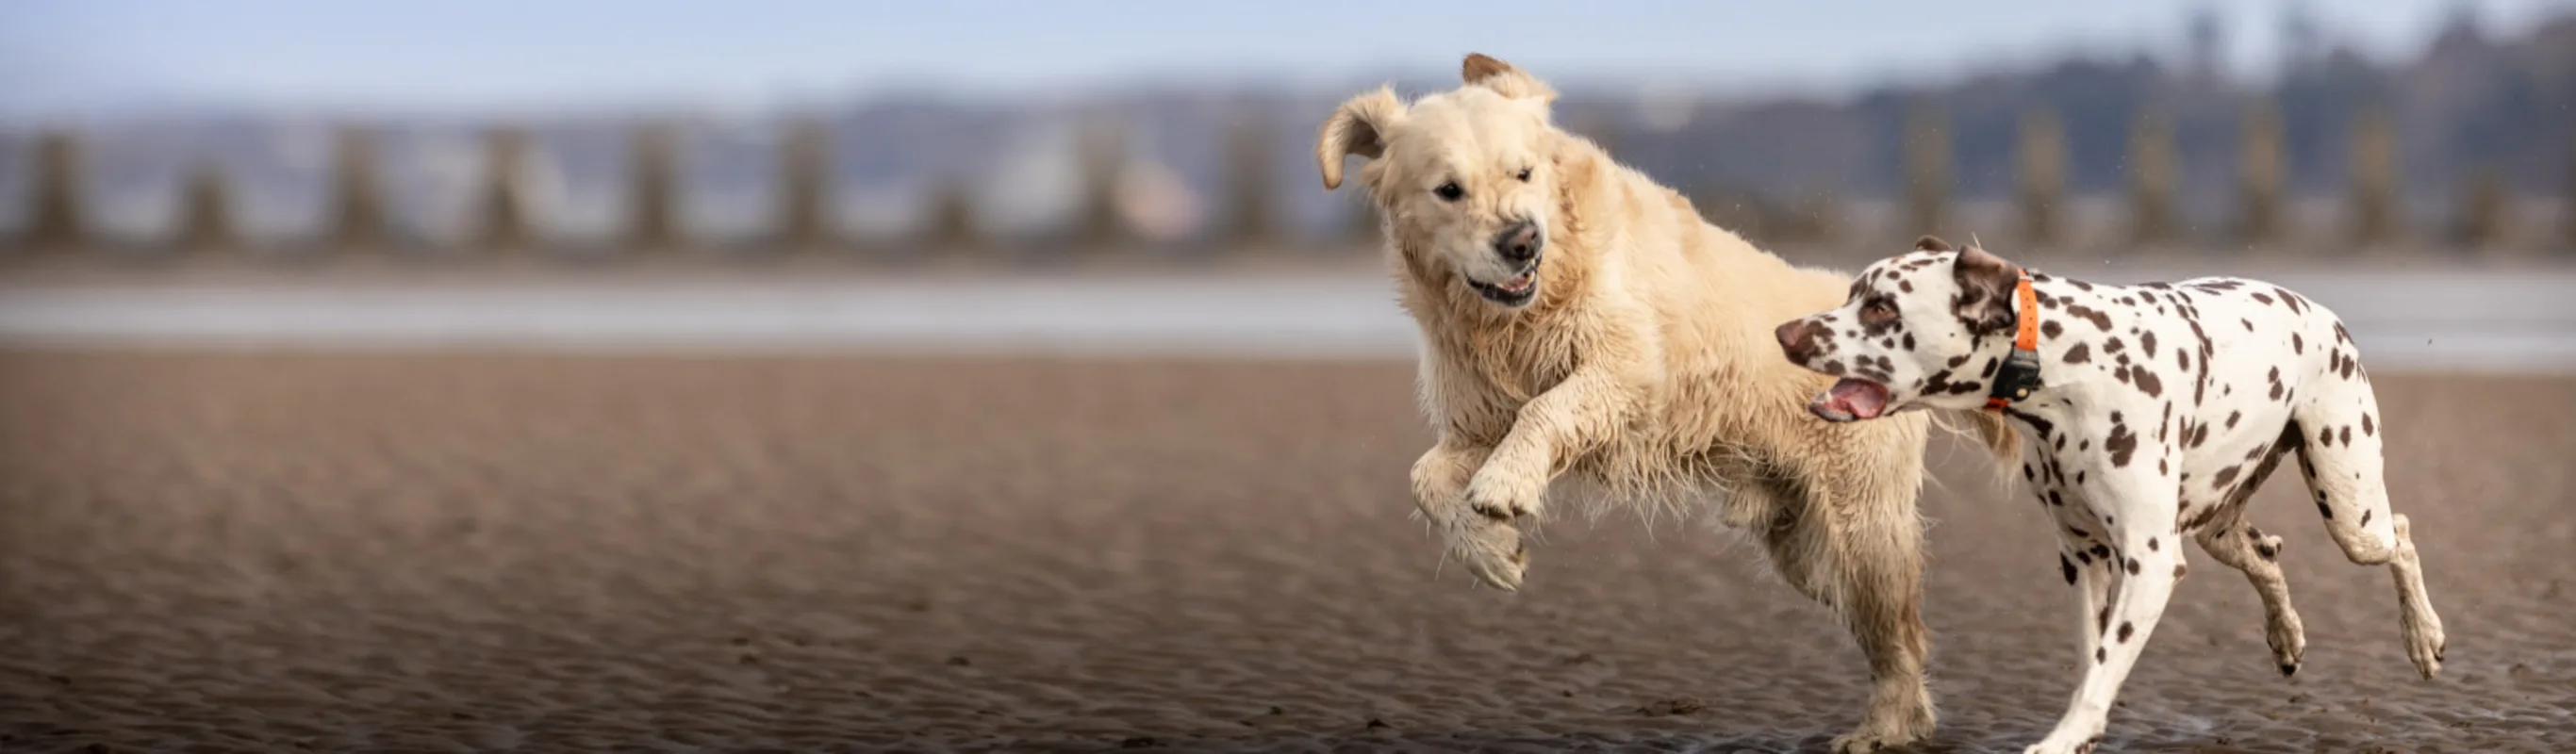 Two Dogs Running on Sand